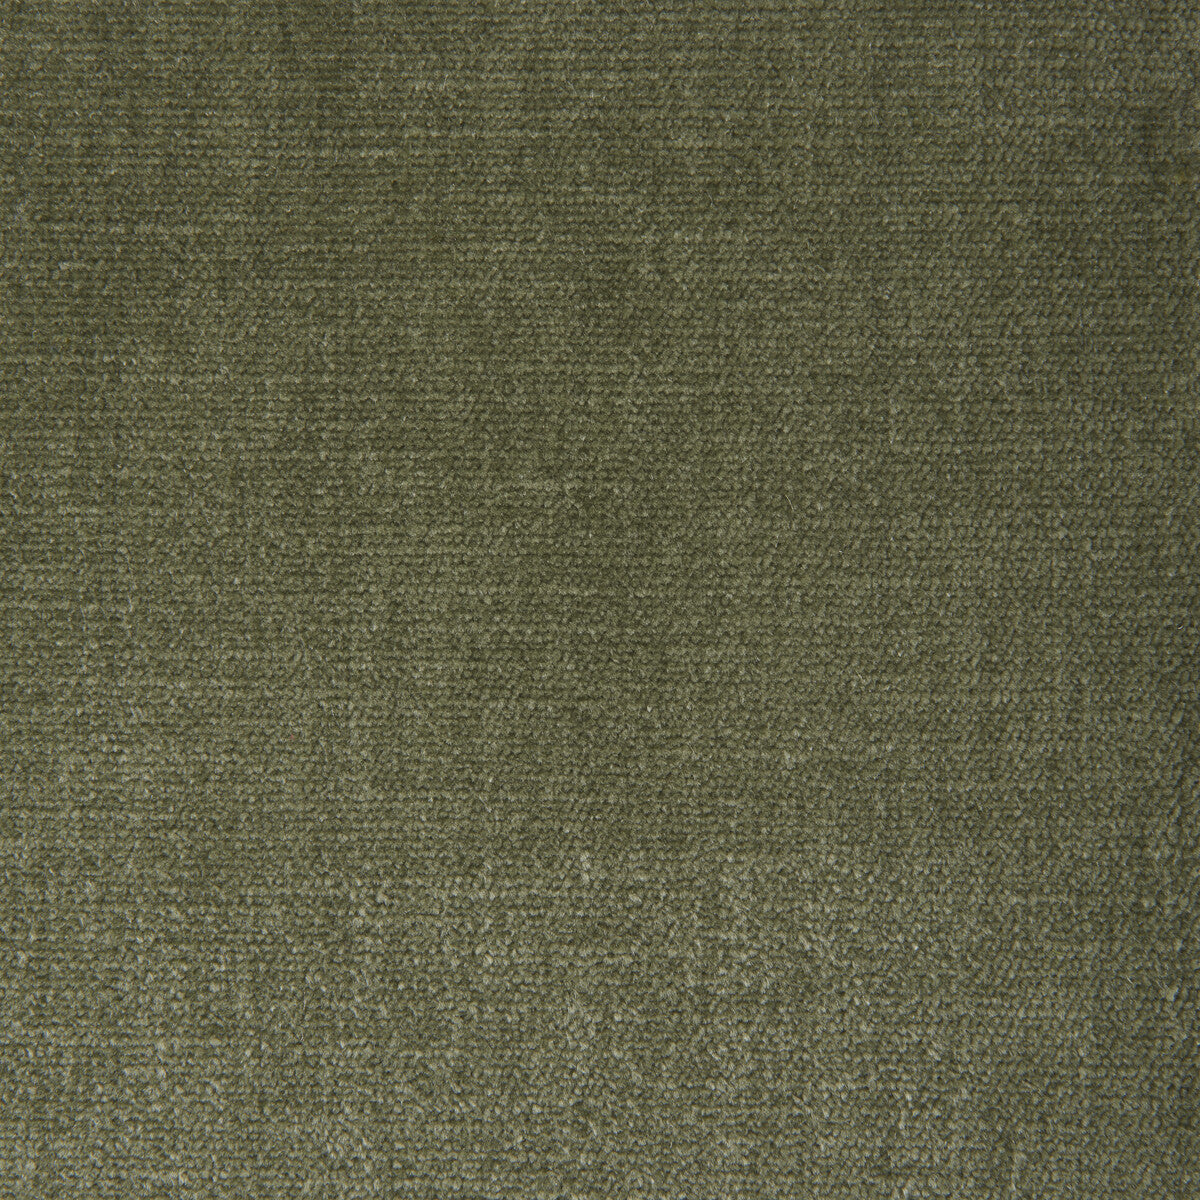 Kravet Smart fabric in 36076-303 color - pattern 36076.303.0 - by Kravet Smart in the Sumptuous Chenille II collection